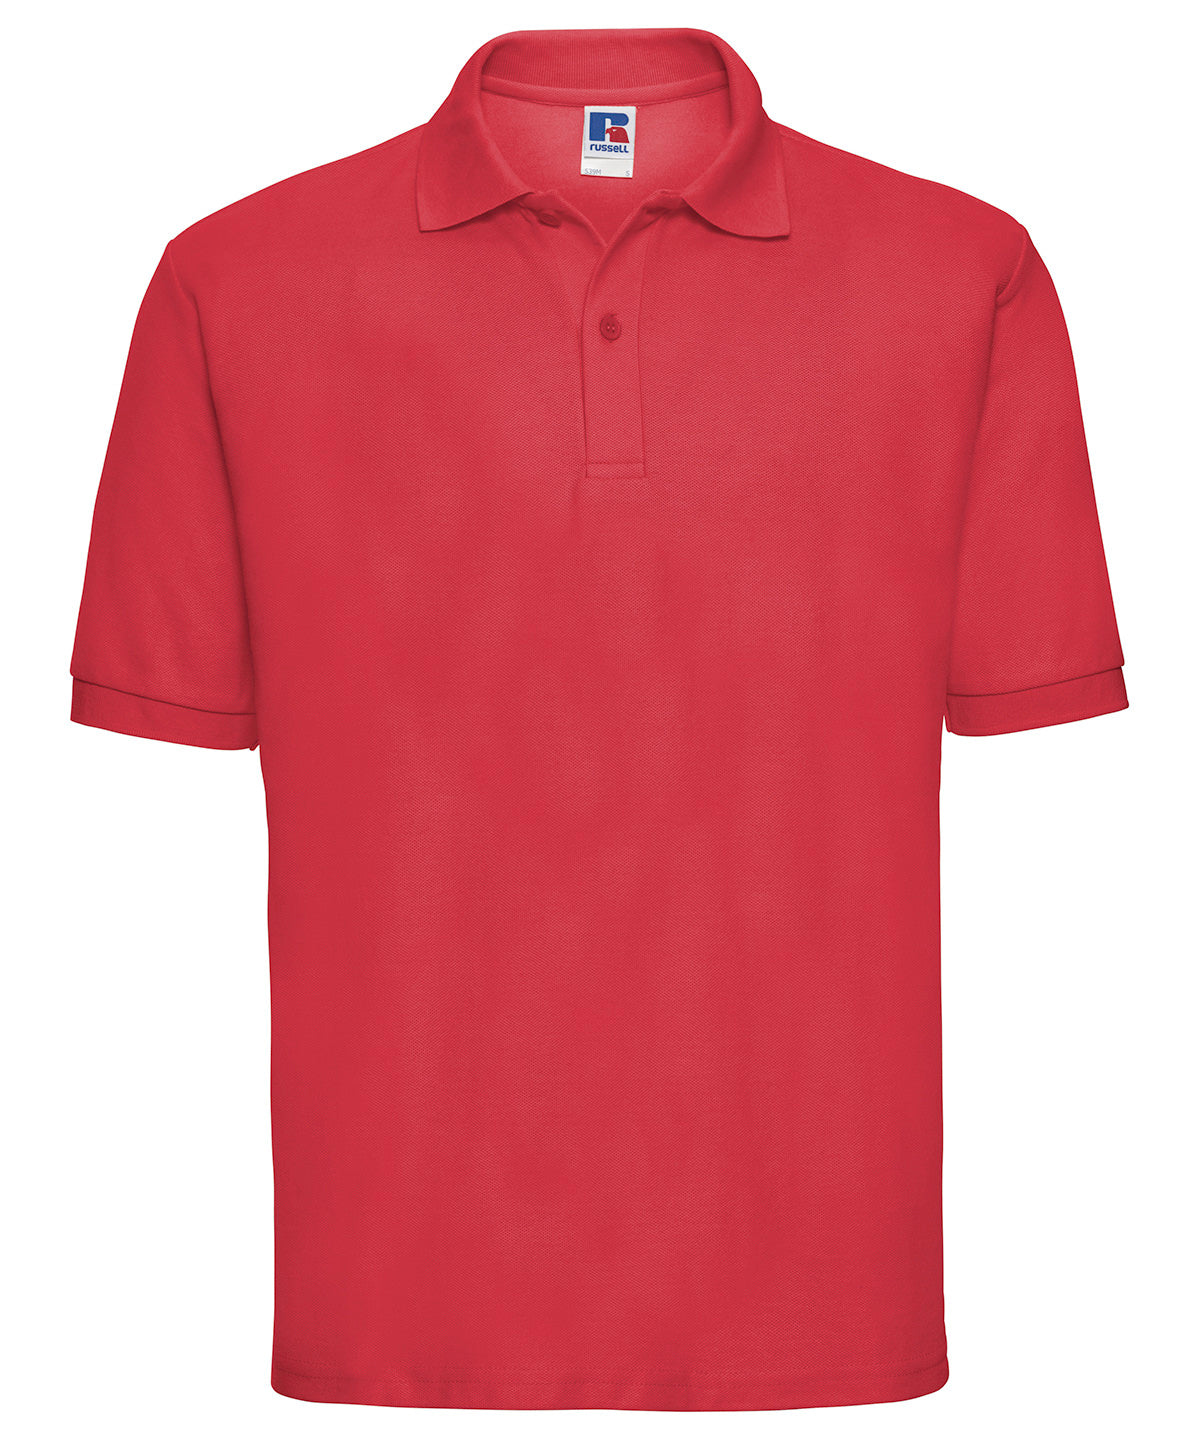 Russell Classic Polycotton Polo Bright Red